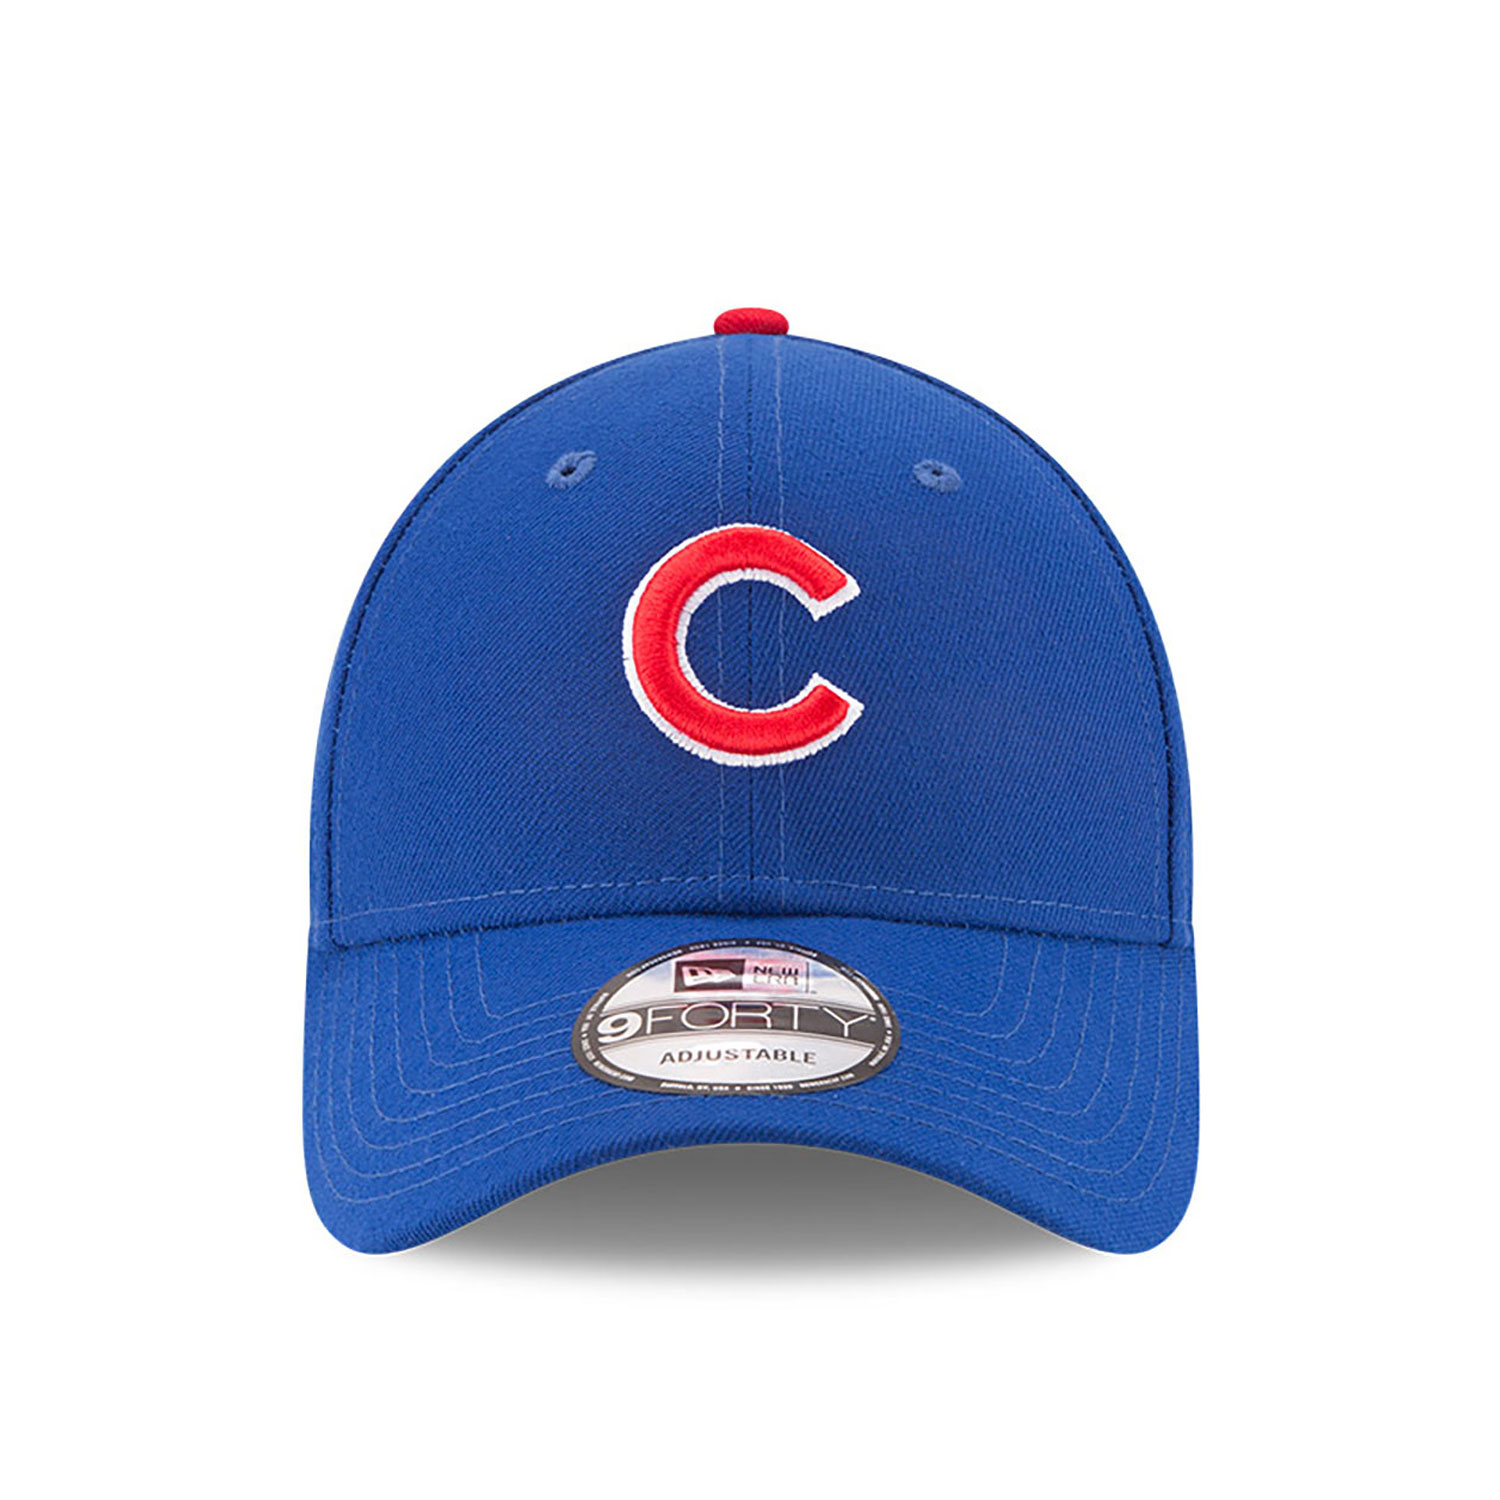 Chicago Cubs Youth The League Black 9FORTY Adjustable Cap